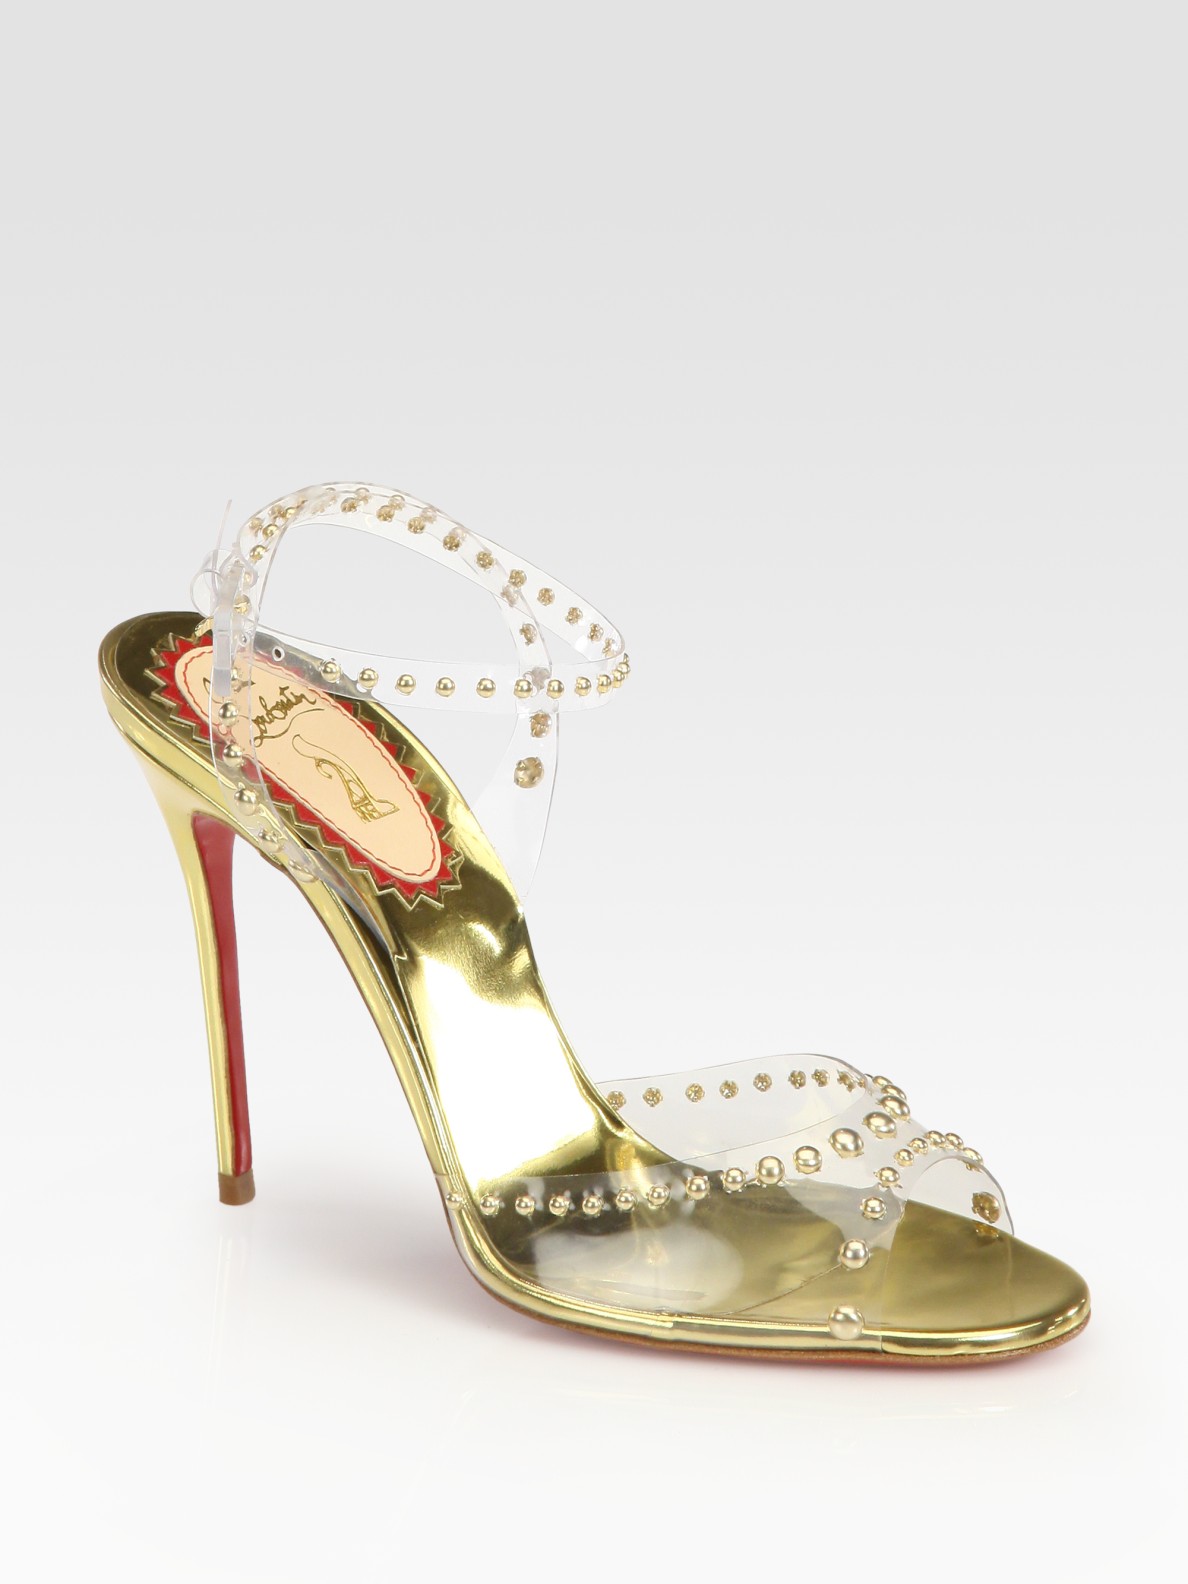 christian louboutin leather slide sandals | Boulder Poetry Tribe